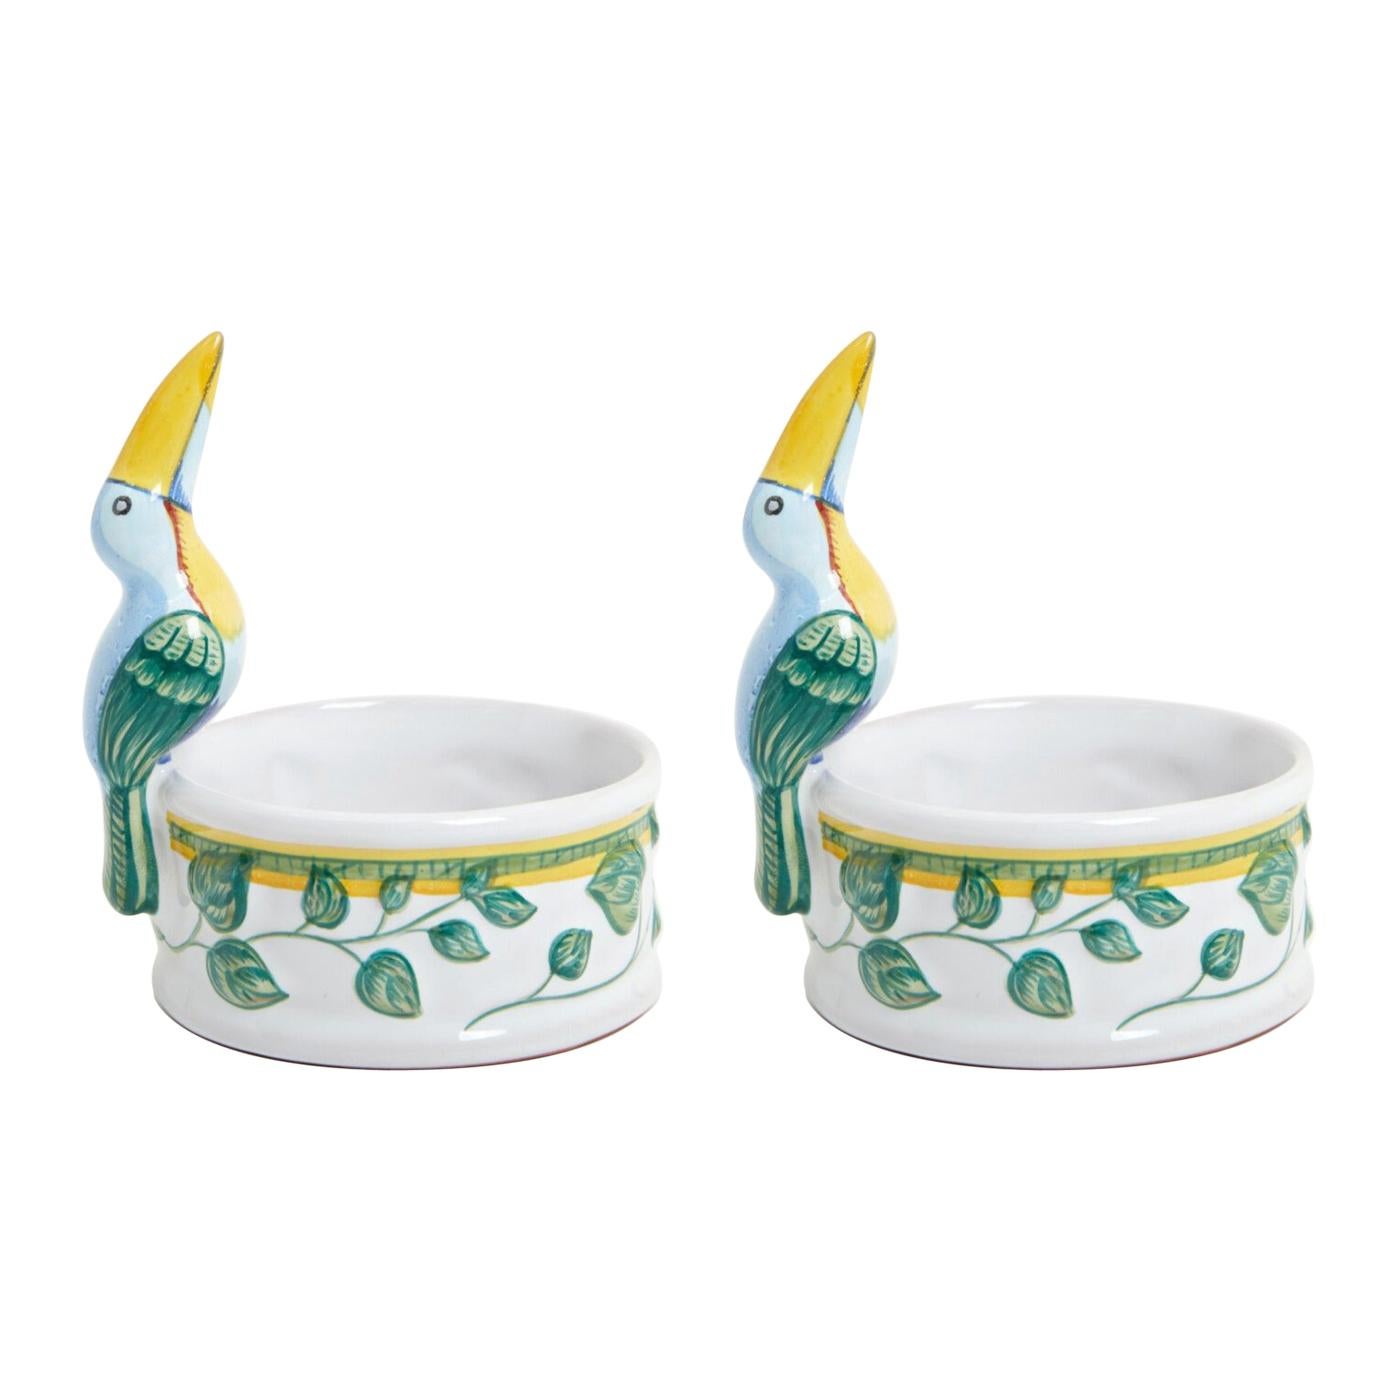 Hermes & Moustiers, Pair of Polychrome Earthenware Candlesticks "Toucans" For Sale